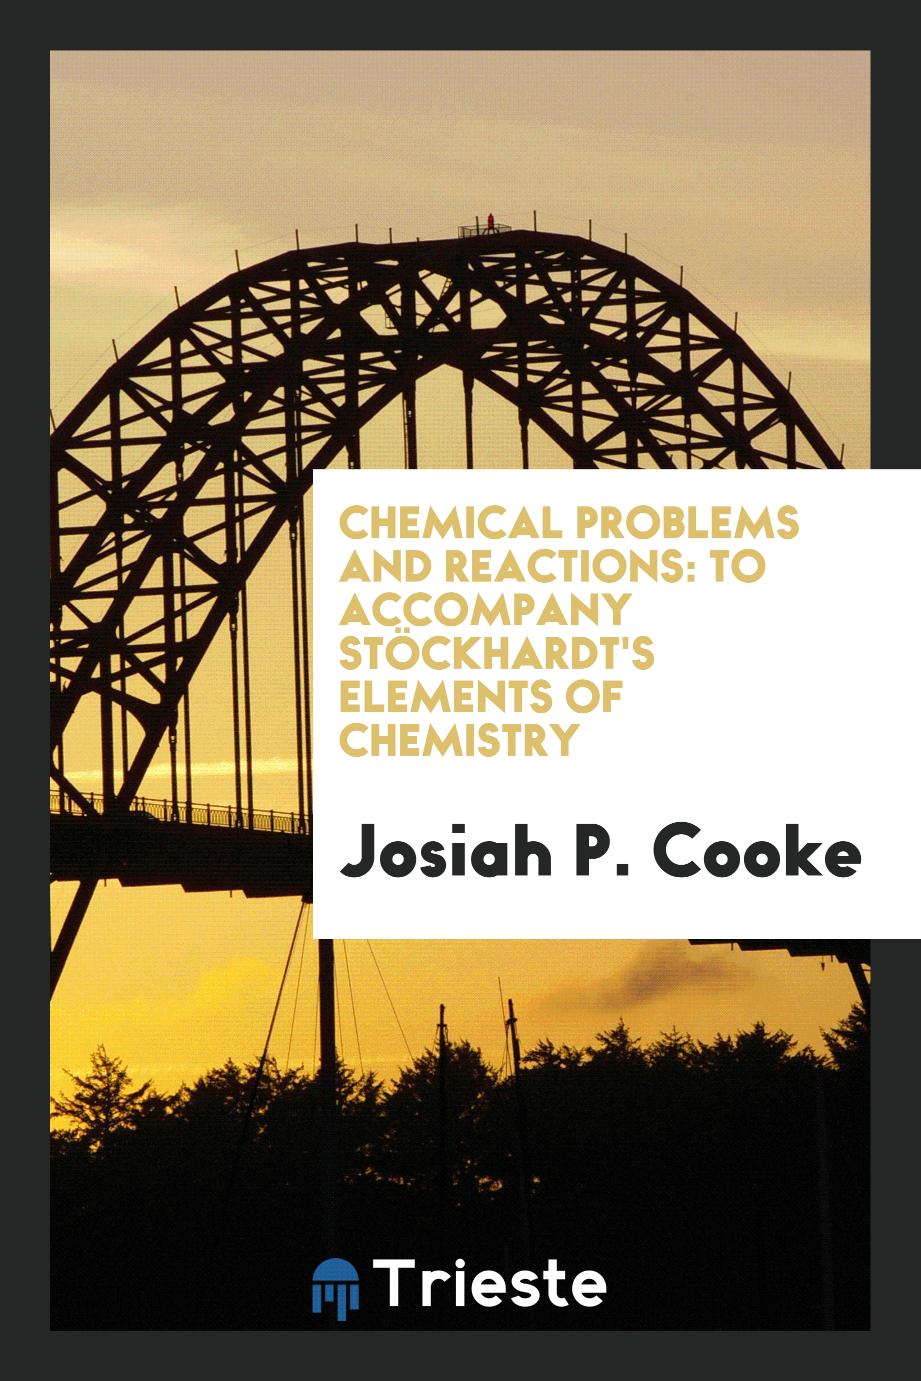 Chemical Problems and Reactions: To Accompany Stöckhardt's Elements of Chemistry